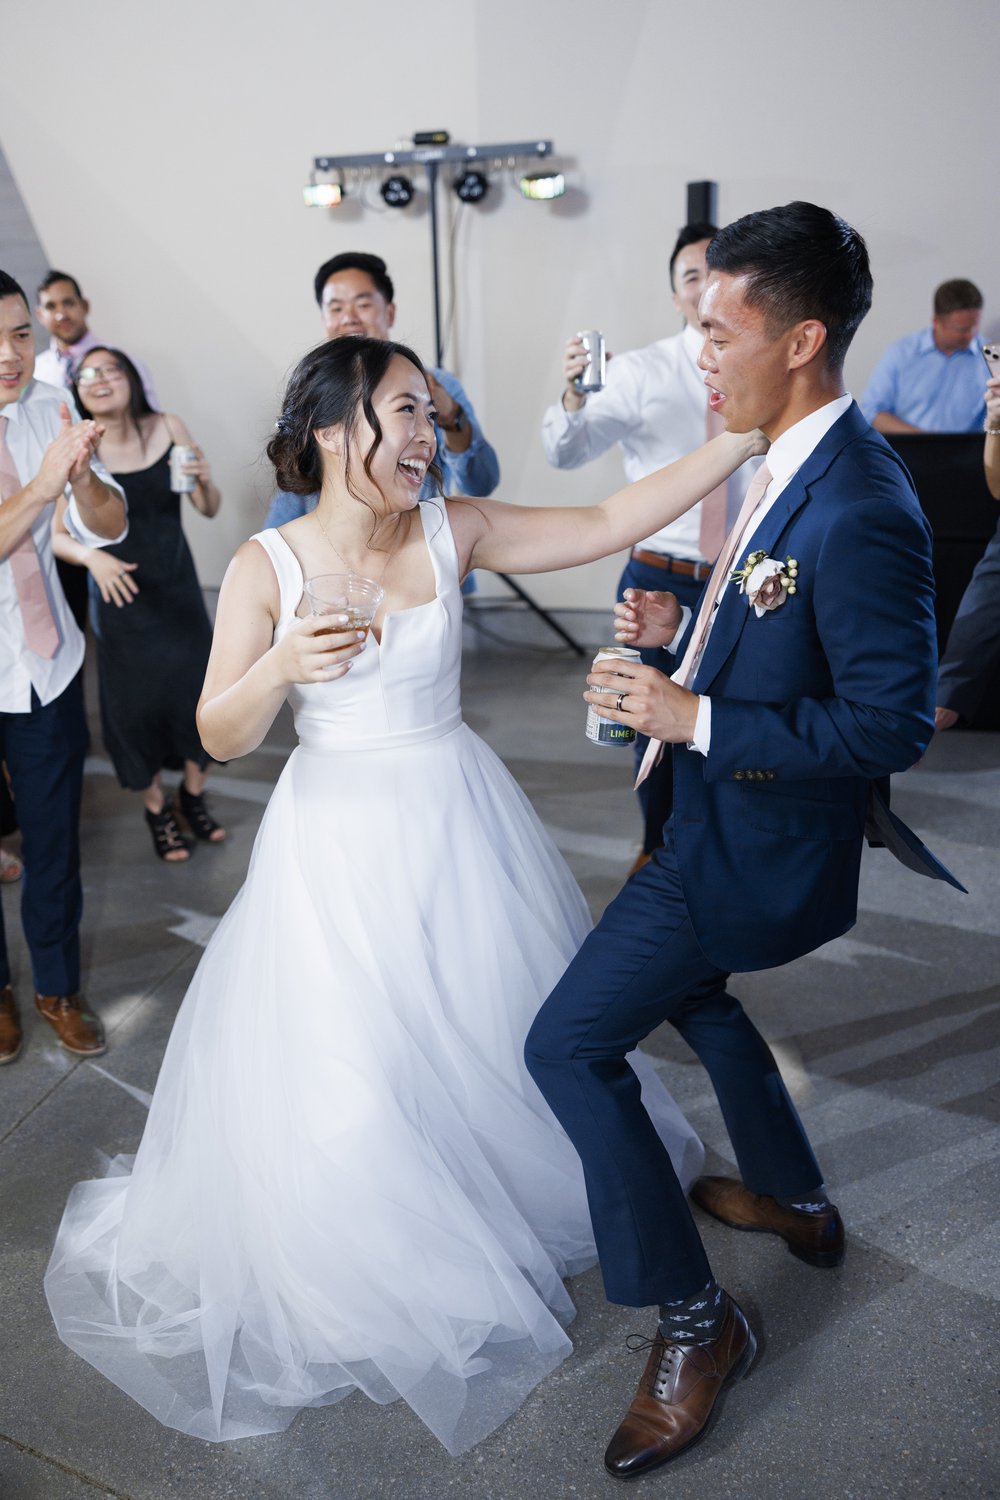  A bride and groom dance at their reception with drinks in their hands by Savanna Richardson Photography. reception photographer UT #SavannaRichardsonPhotography #SavannaRichardsonWeddings #bridals #formals #bouquets #Utahweddingphotographers #Weddin